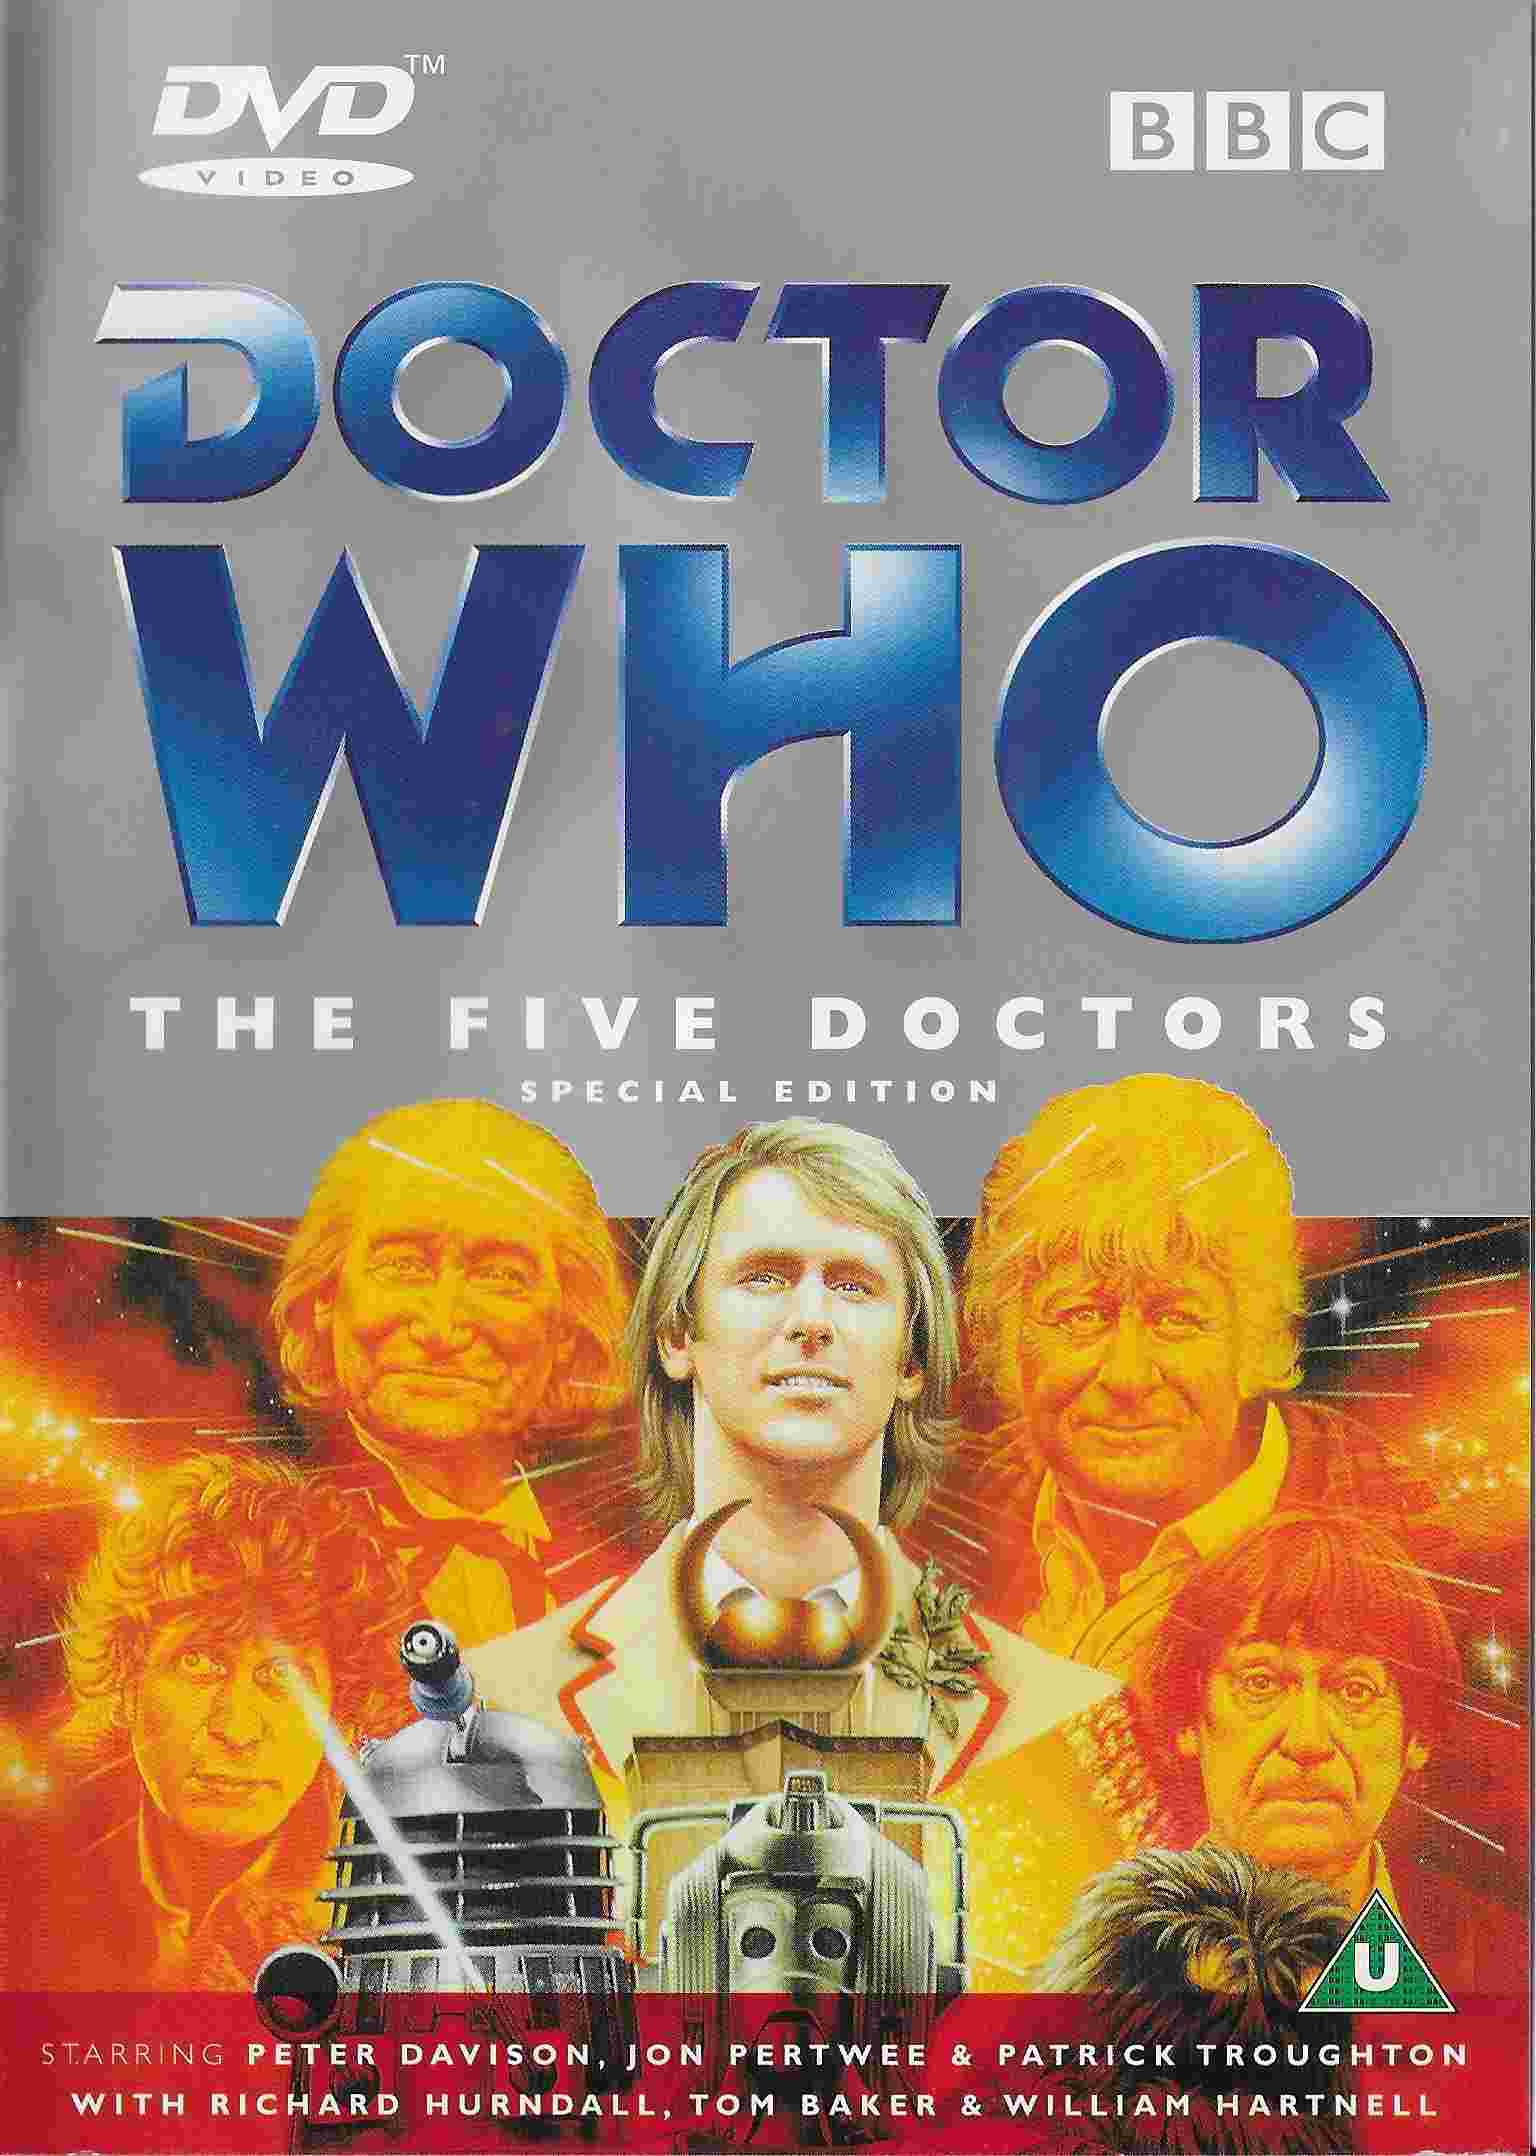 Picture of BBCDVD 1006 Doctor Who - The five Doctors by artist Terrance Dicks from the BBC records and Tapes library